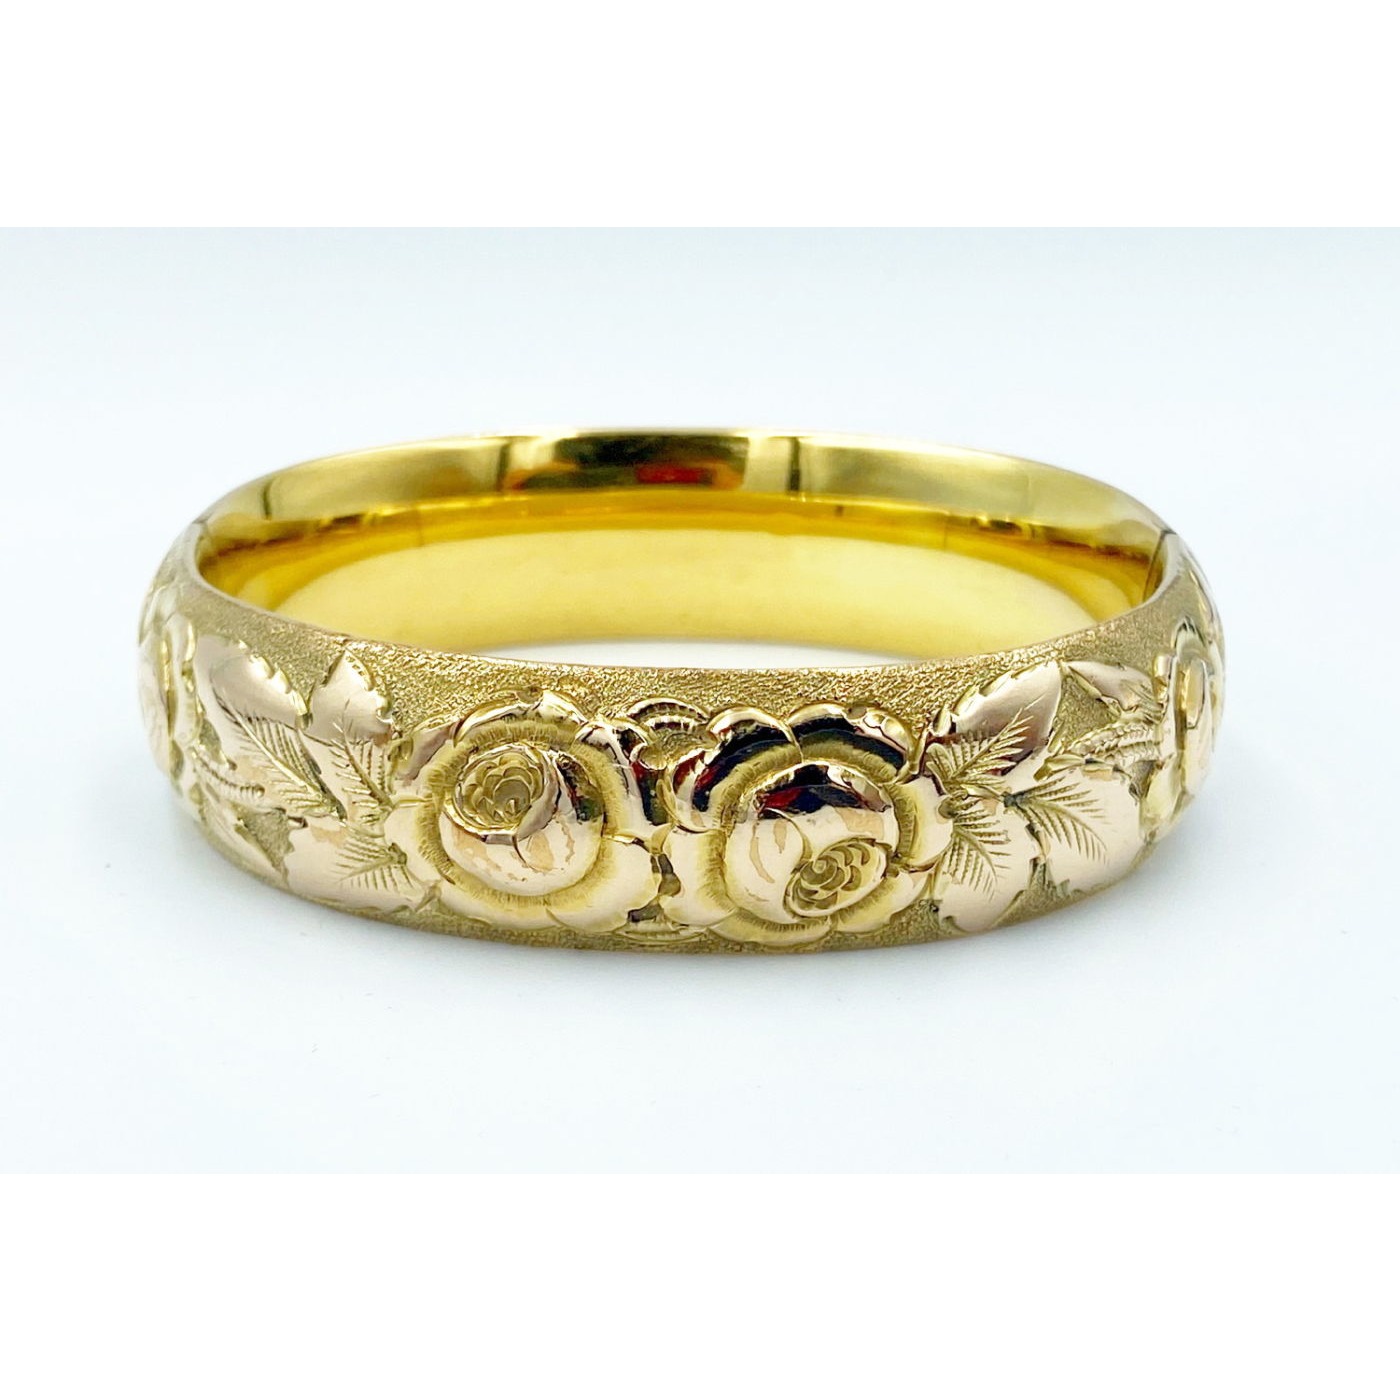 Excellent Deeply Engraved Engagement Bangle w/ Roses